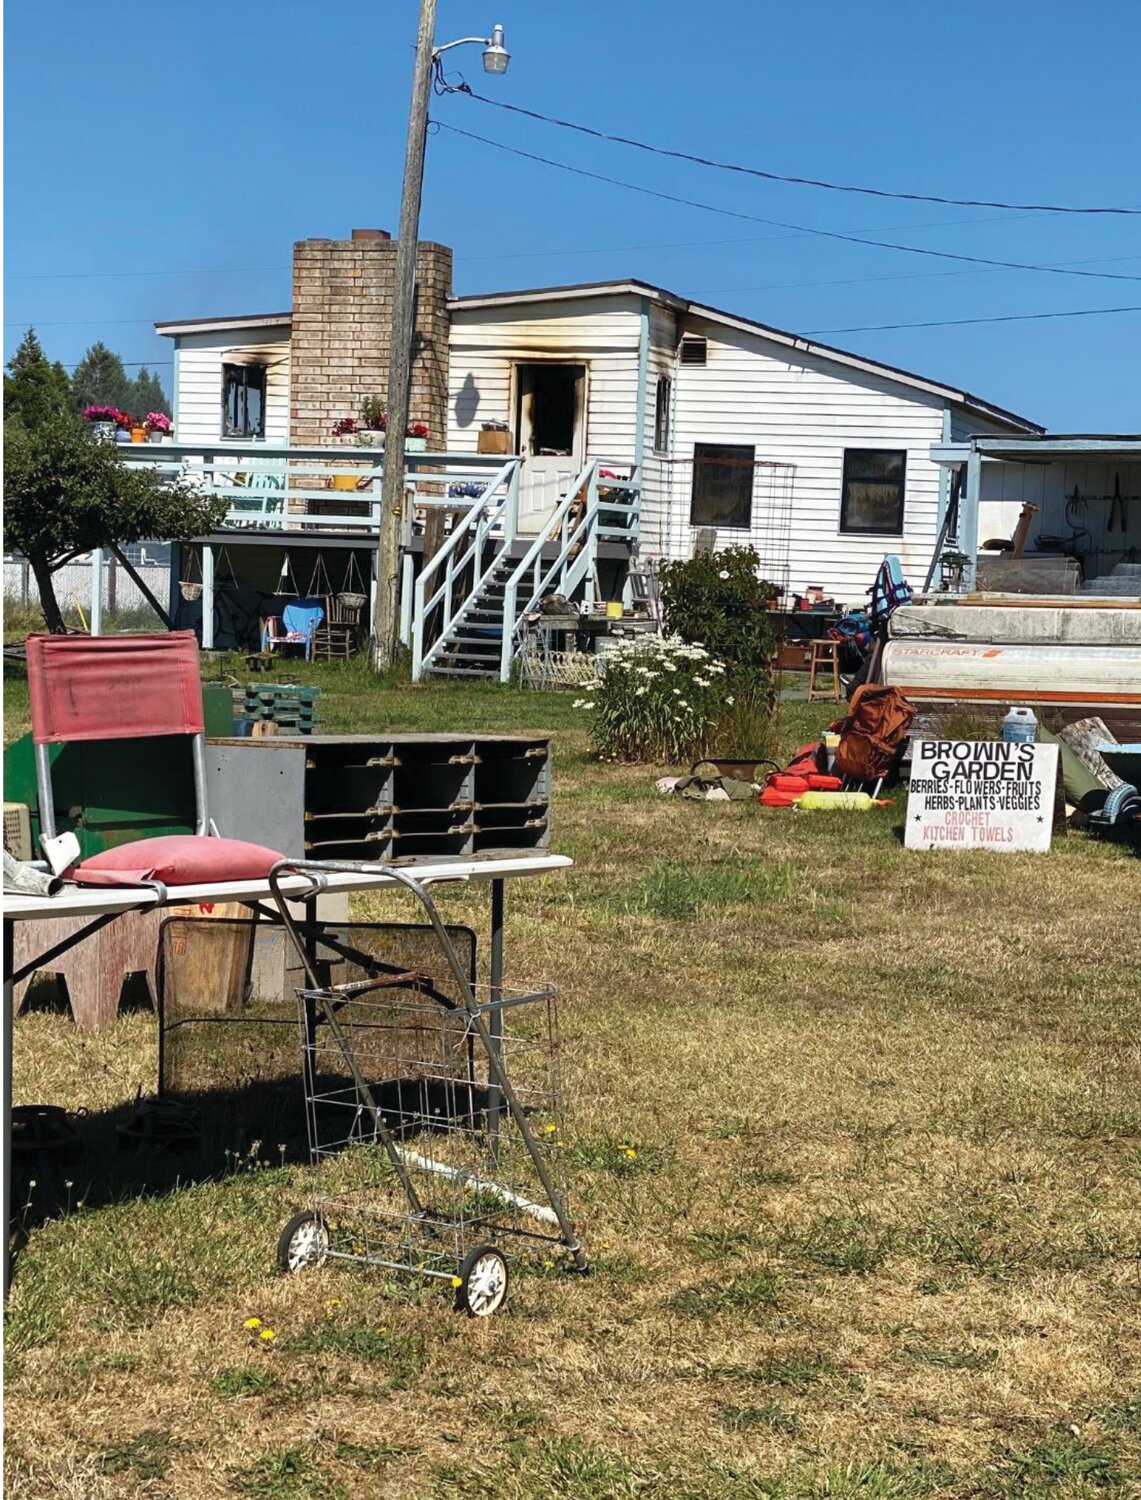 A wind-driven fire destroyed a house in Dungeness on Sunday, July 9.